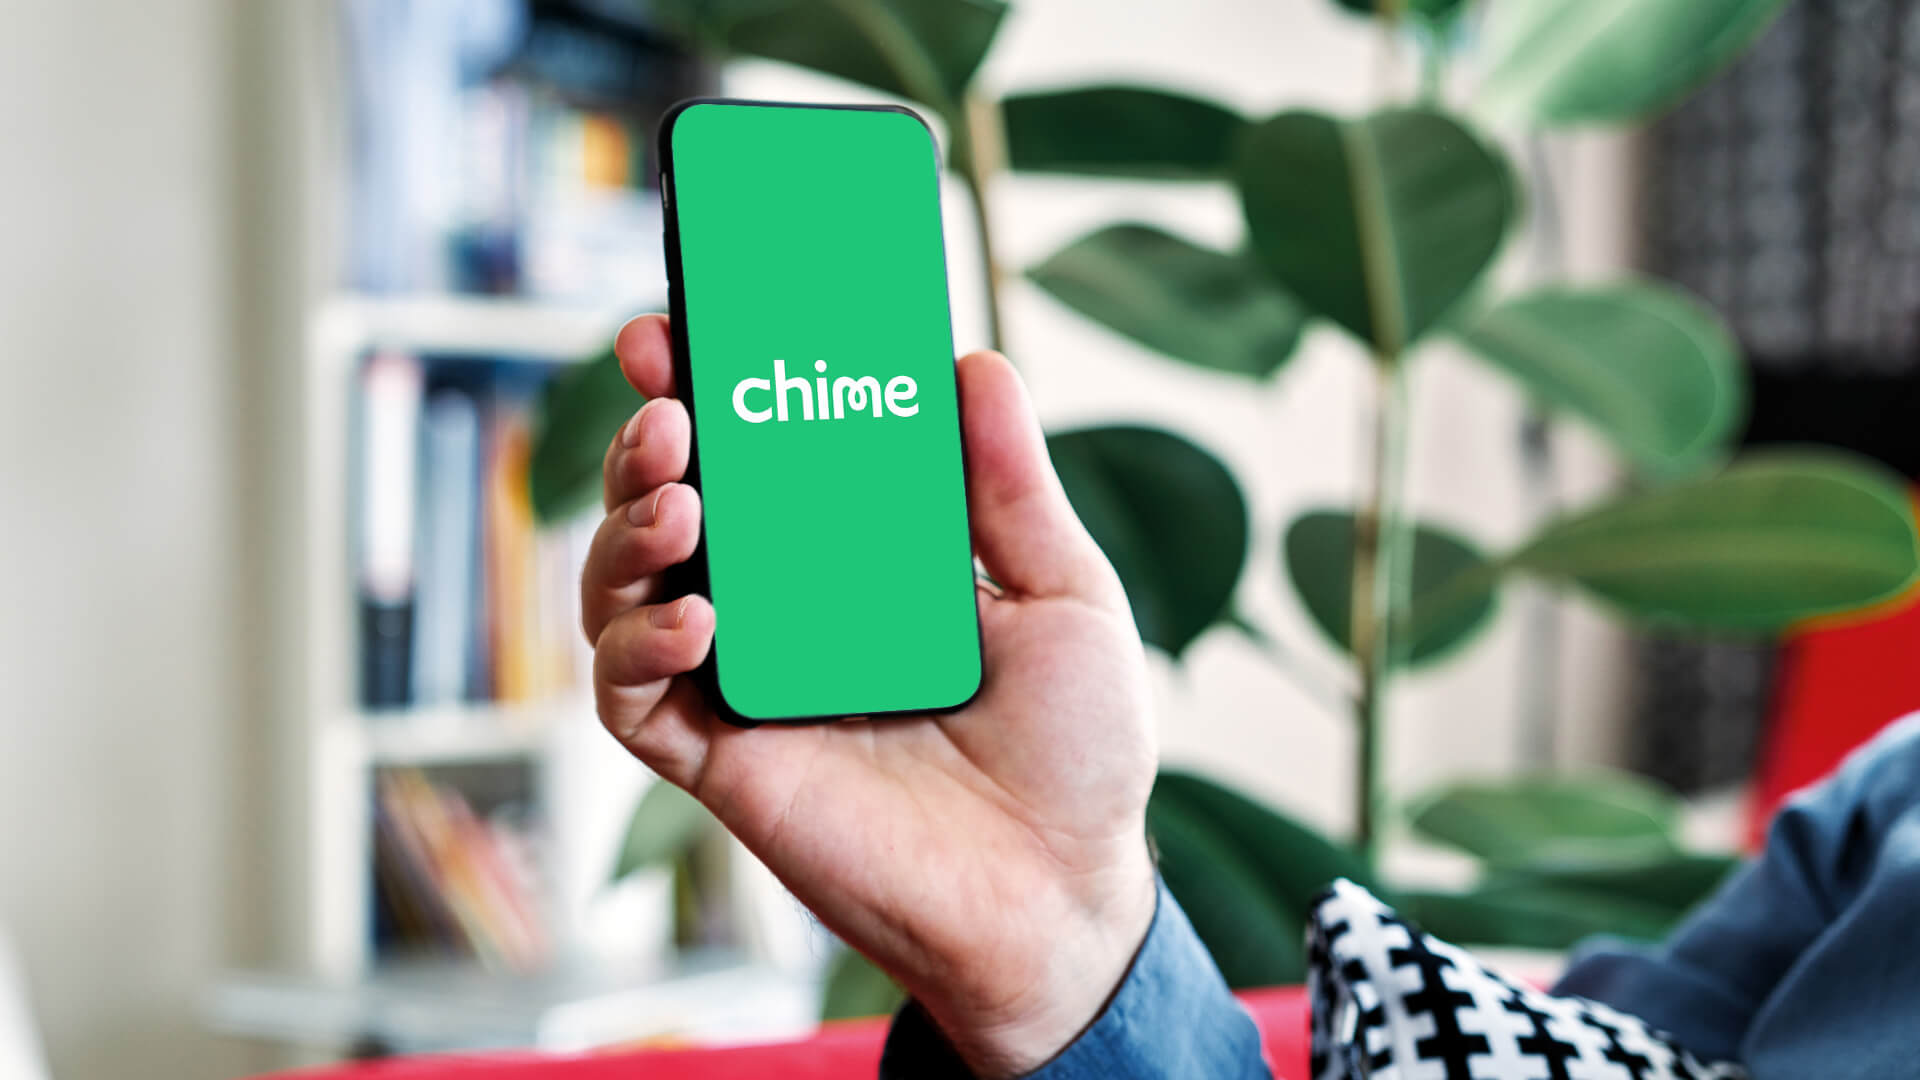 Woman's hand holding a phone that displays the Chime app